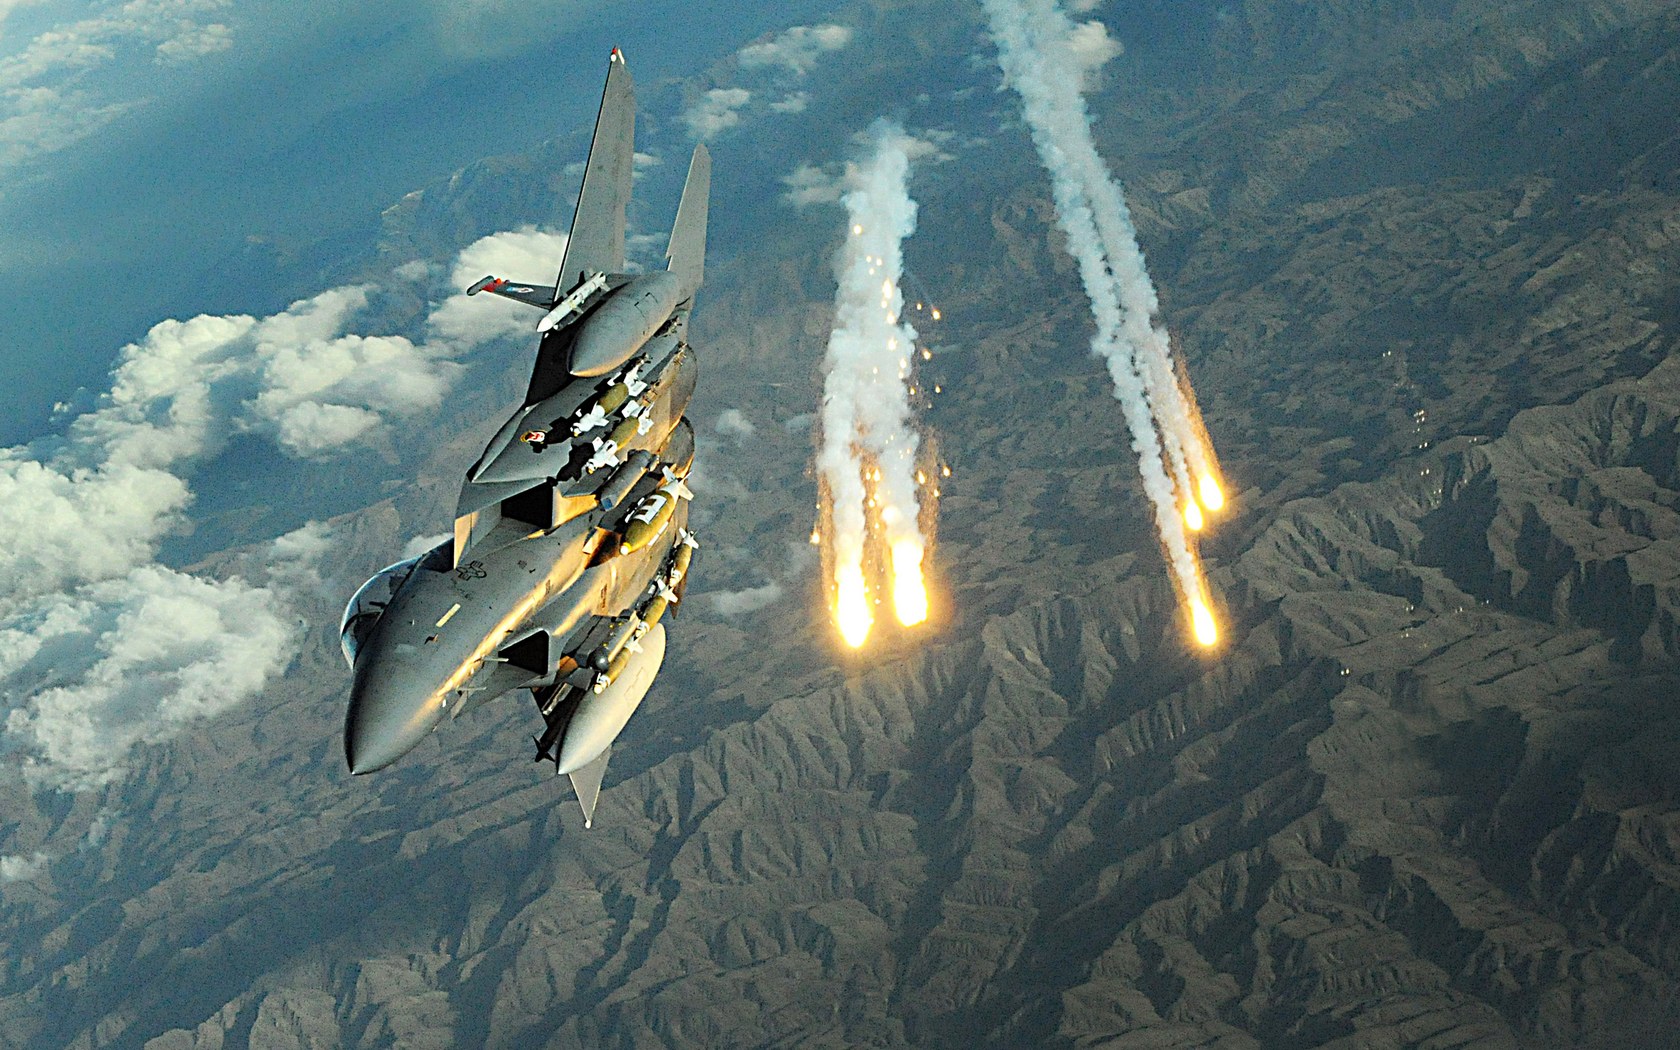 Download HQ F-15 Strike Eagle Deploys Countermesures Military Airplanes wallpaper / 1680x1050